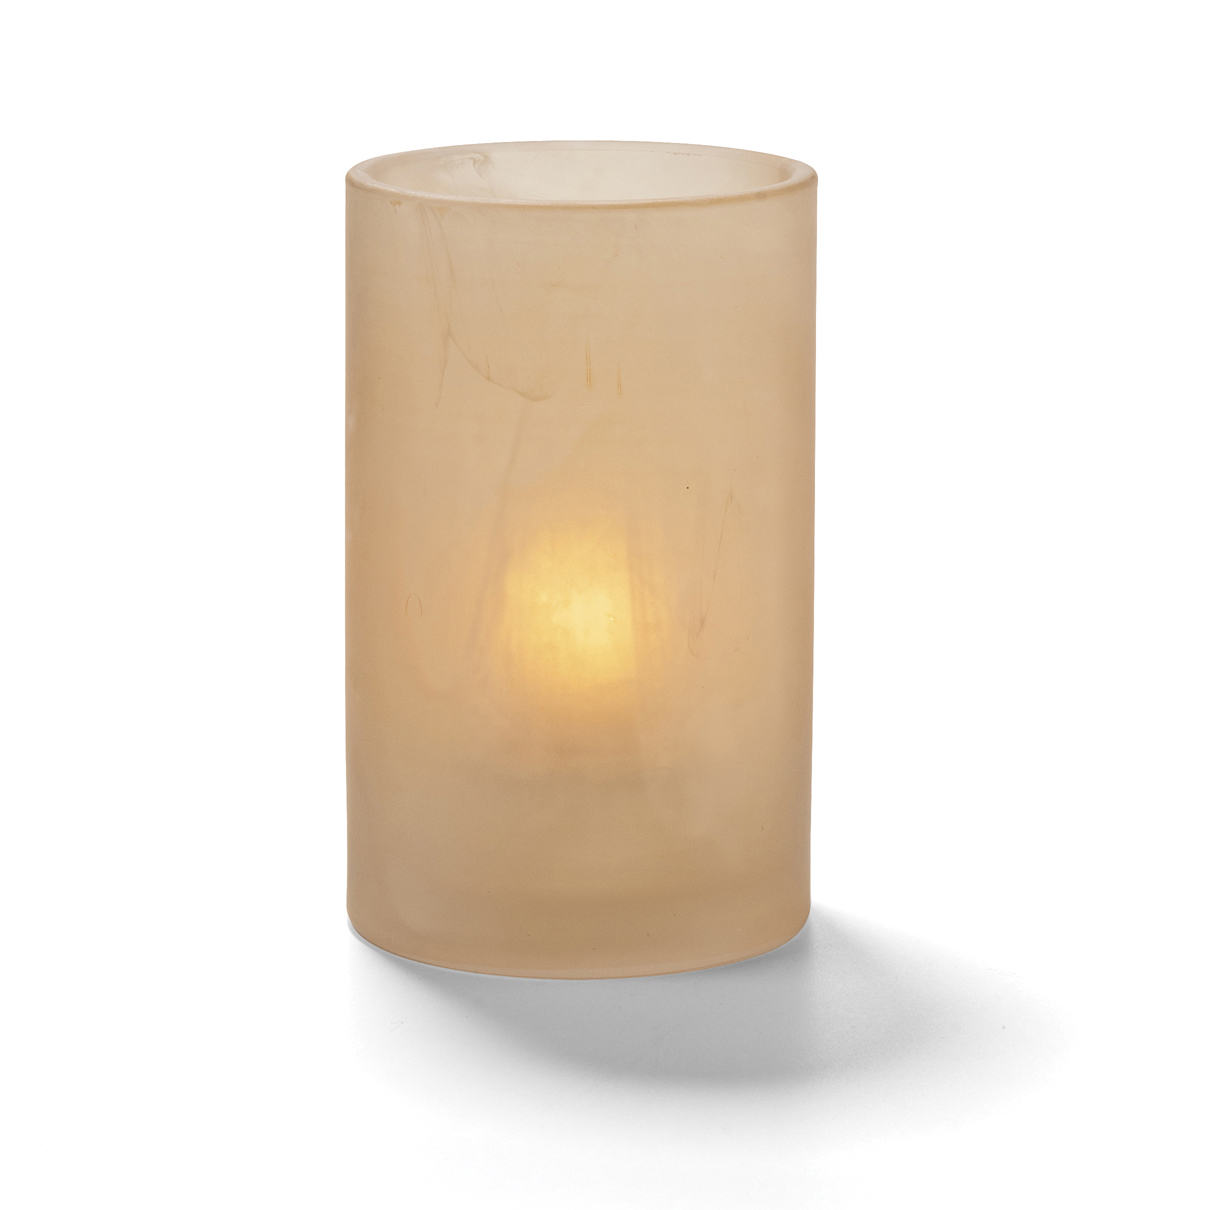 44017SCA Qcandles Glass Candle Holder Carmel,glass candle holders,glass candle holder,decorative candle holders,wedding candle holders